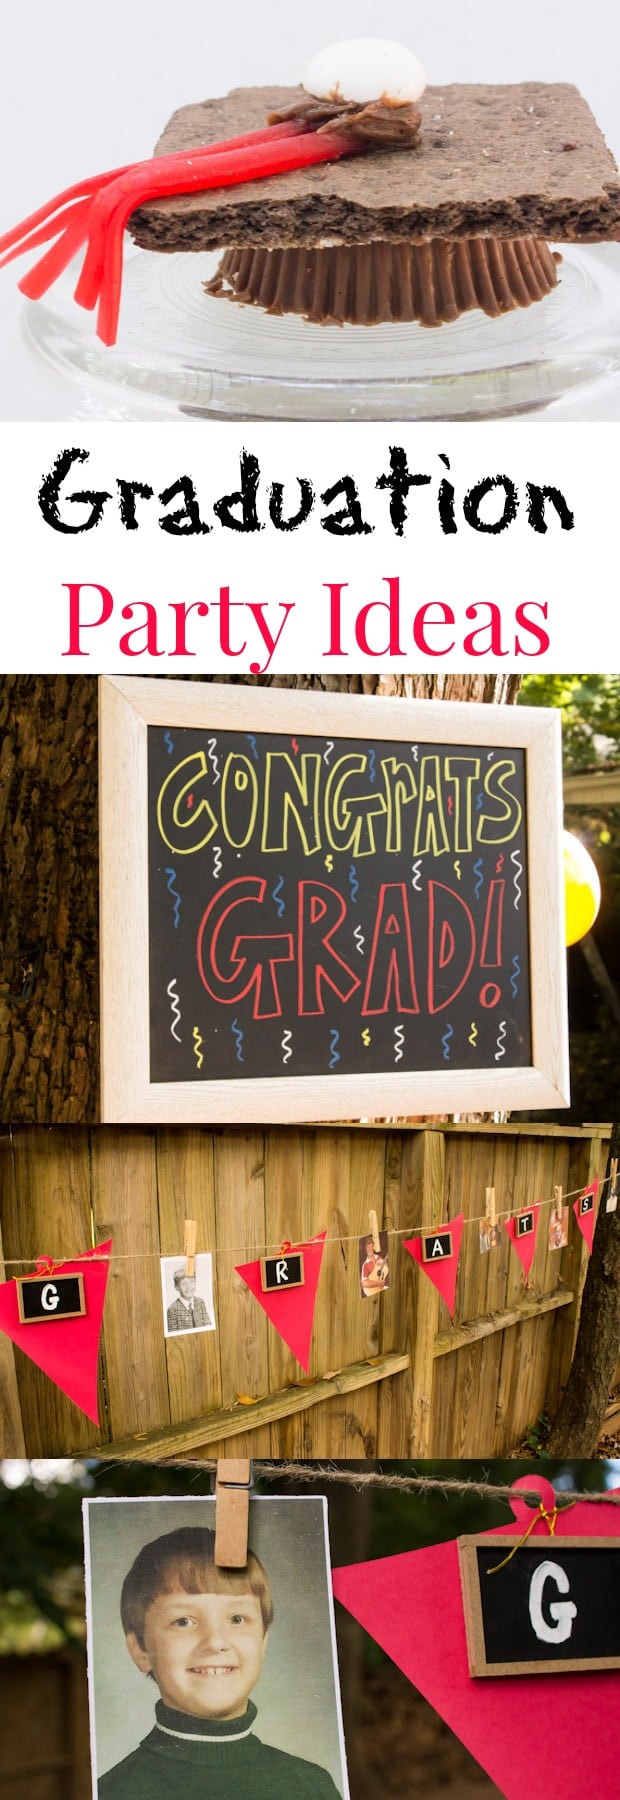 Photo Collage Ideas For Graduation Party
 Graduation Party Ideas for All Ages